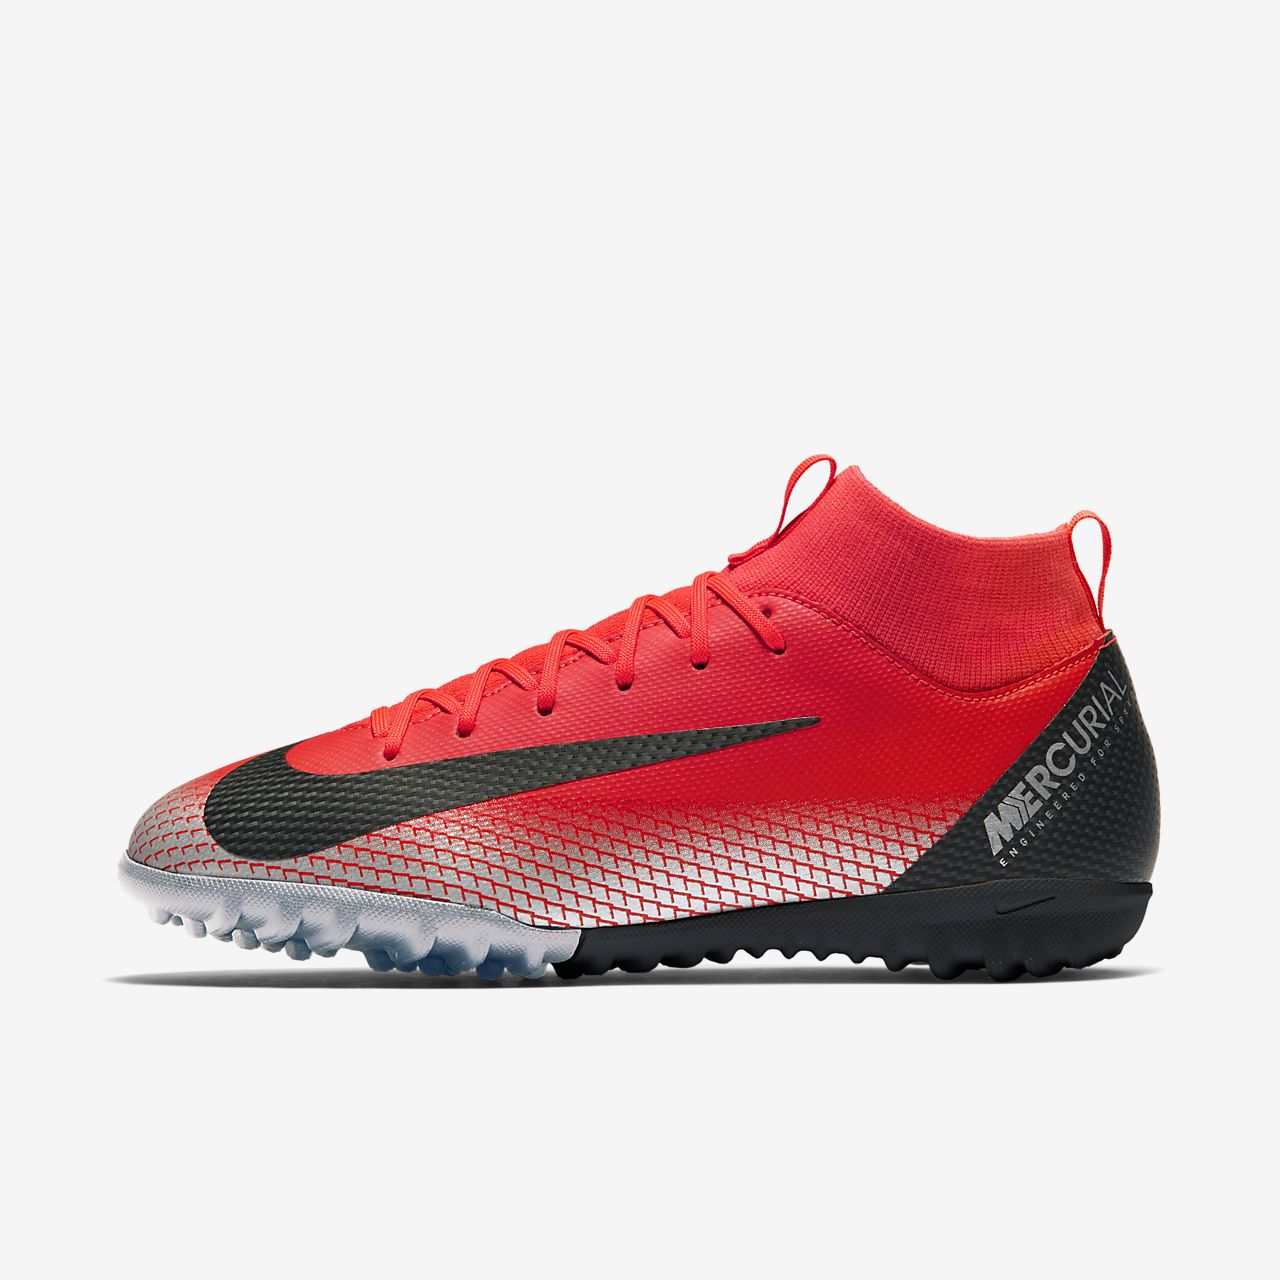 Chuteira Nike Mercurial X Superfly 6 Elite Futsal Imperial Outlet